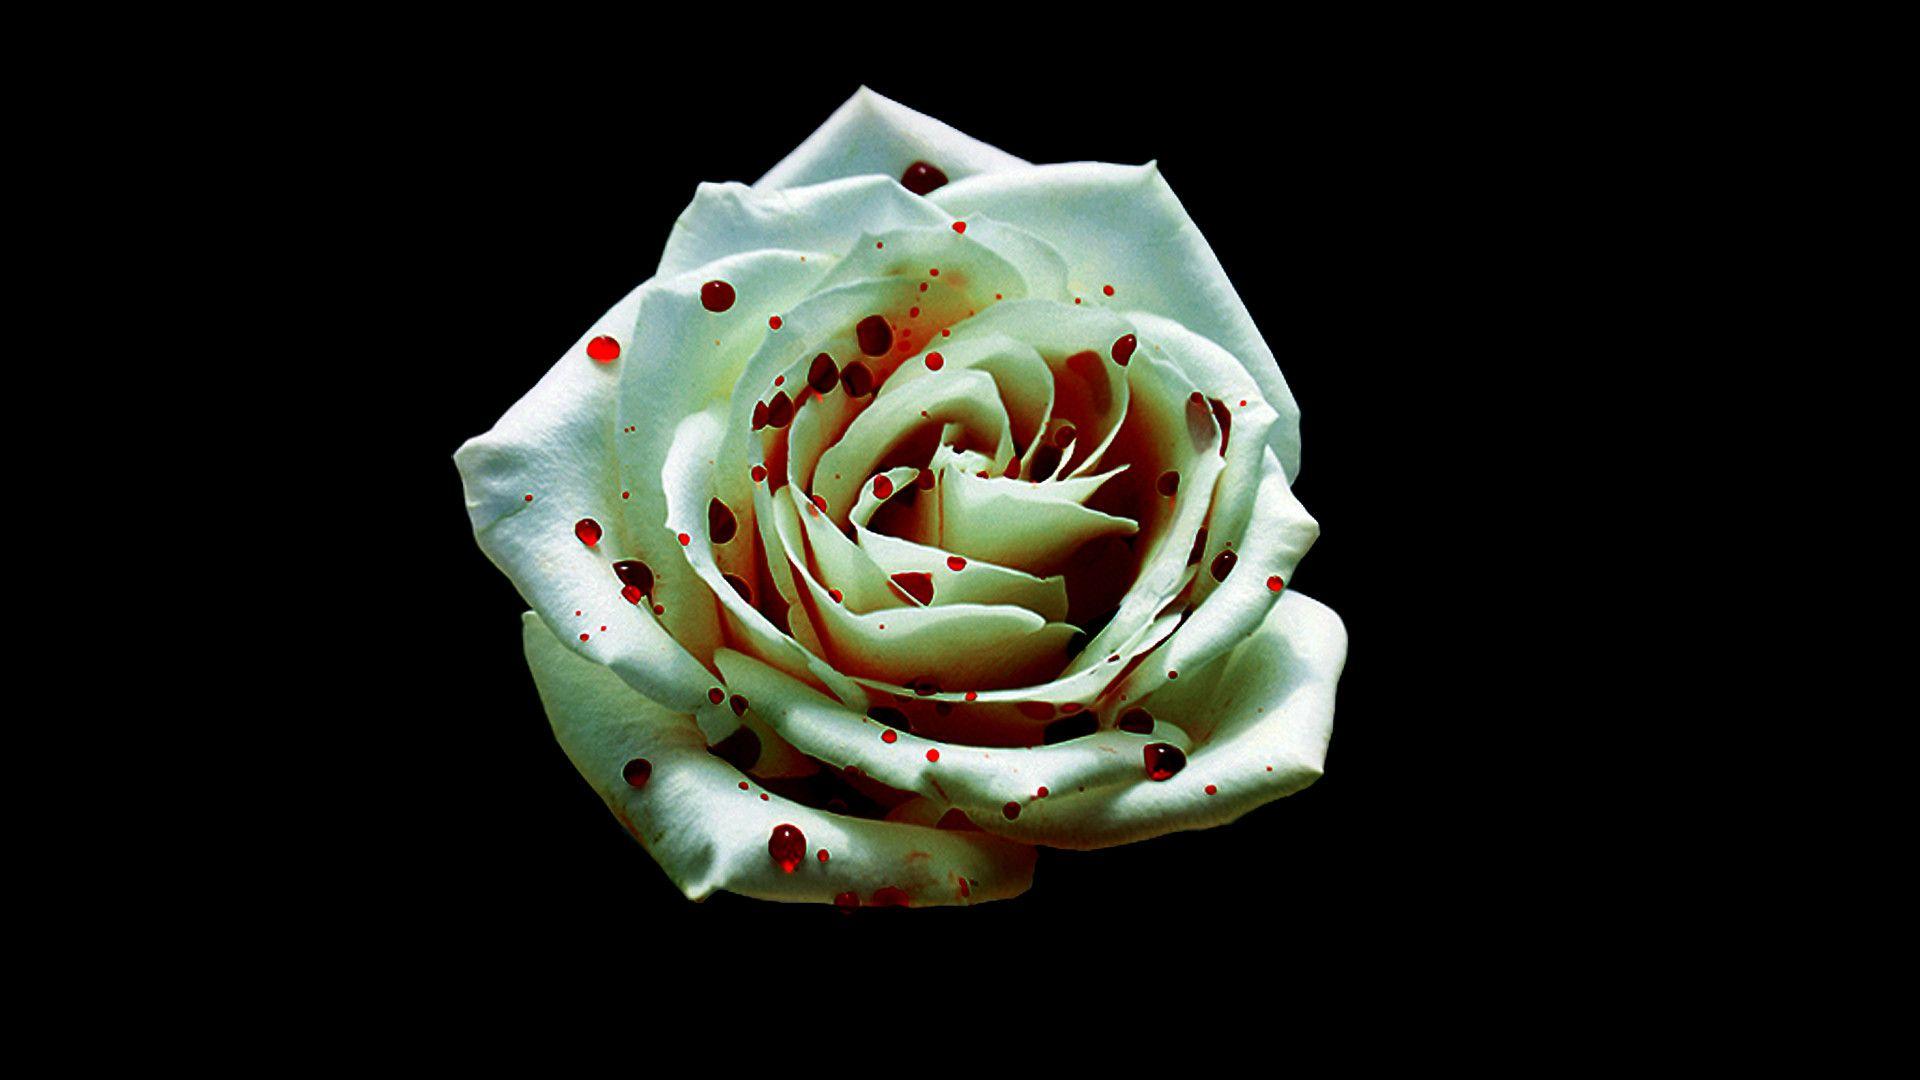 2200 Bloody Rose Stock Photos Pictures  RoyaltyFree Images  iStock  Bloody  flower Vampire Roses